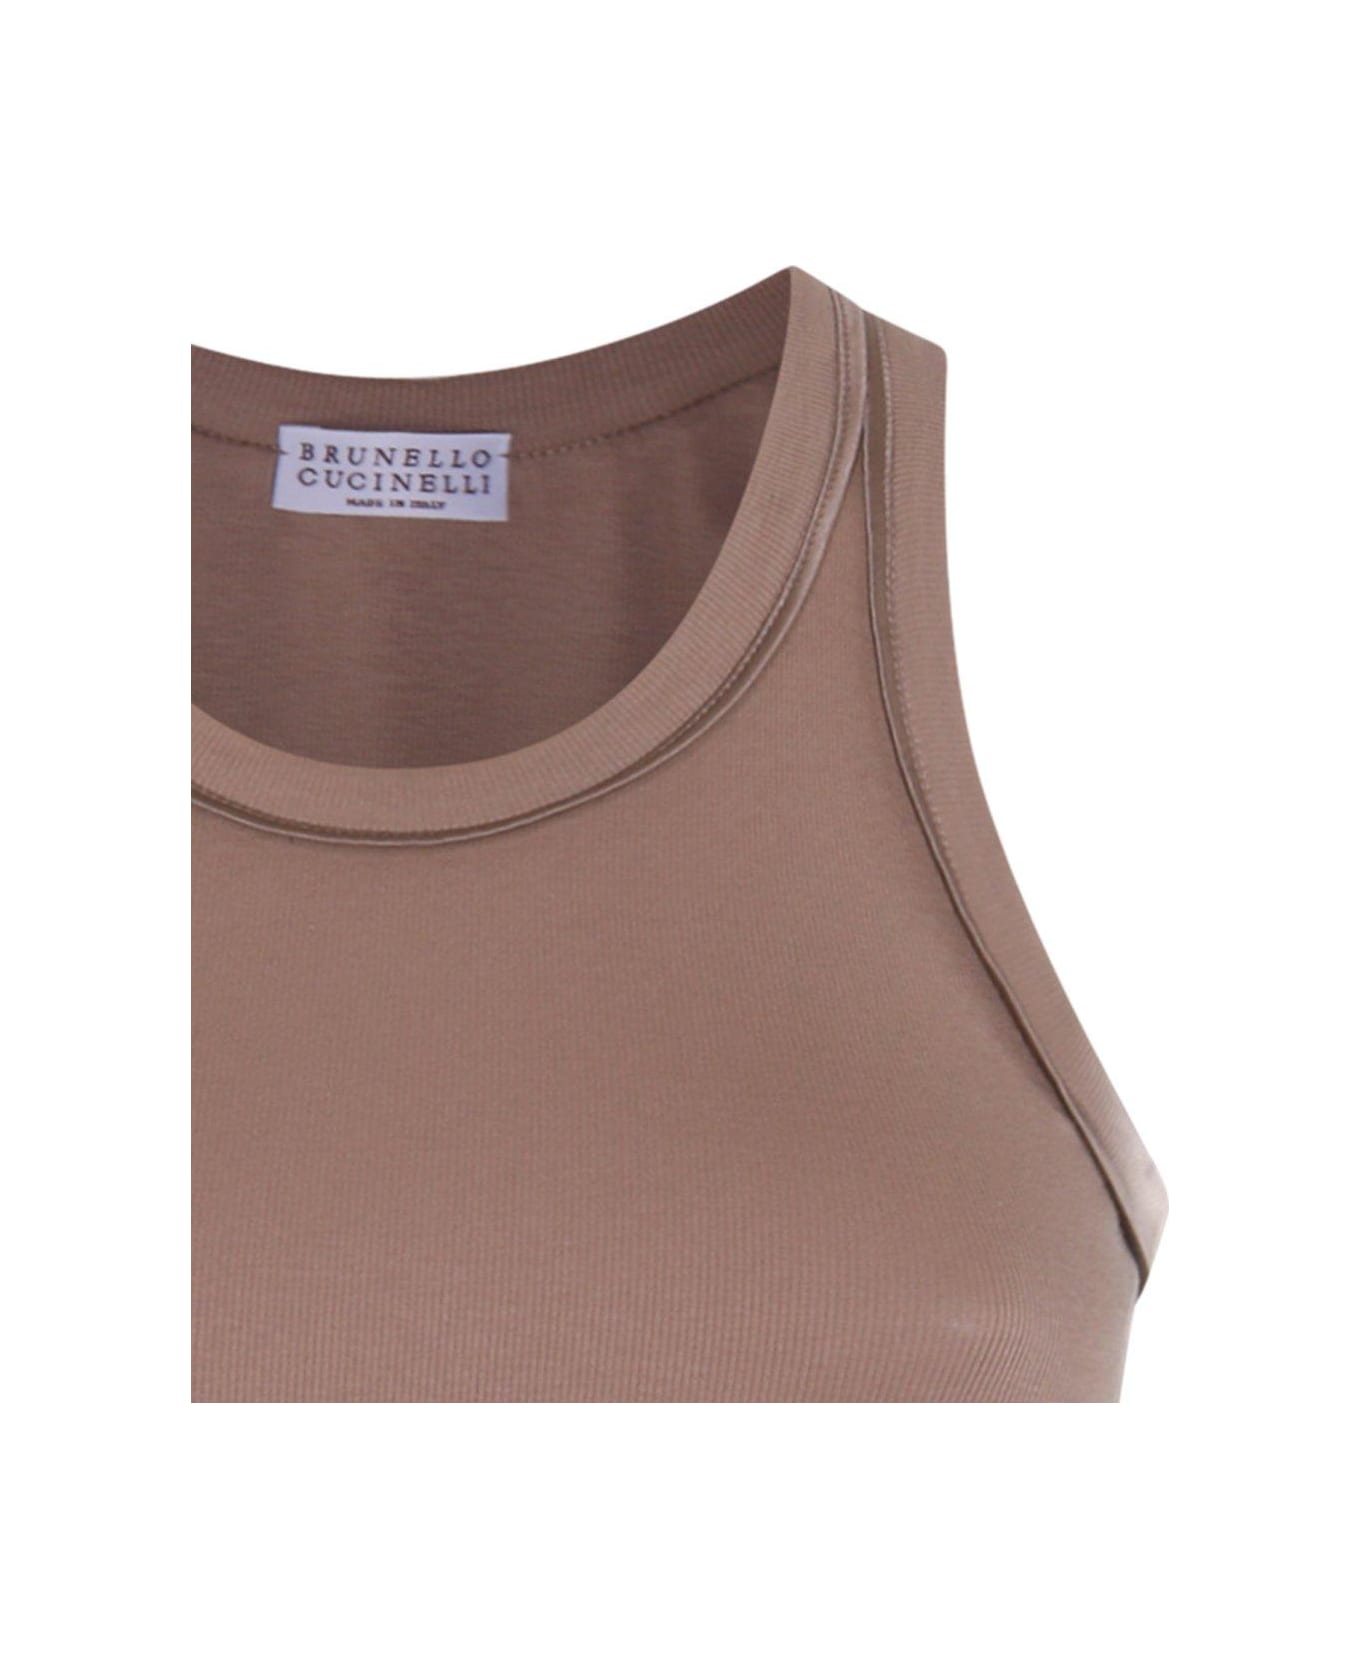 Brunello Cucinelli Stretched Ribbed Jersey Top - Coyote